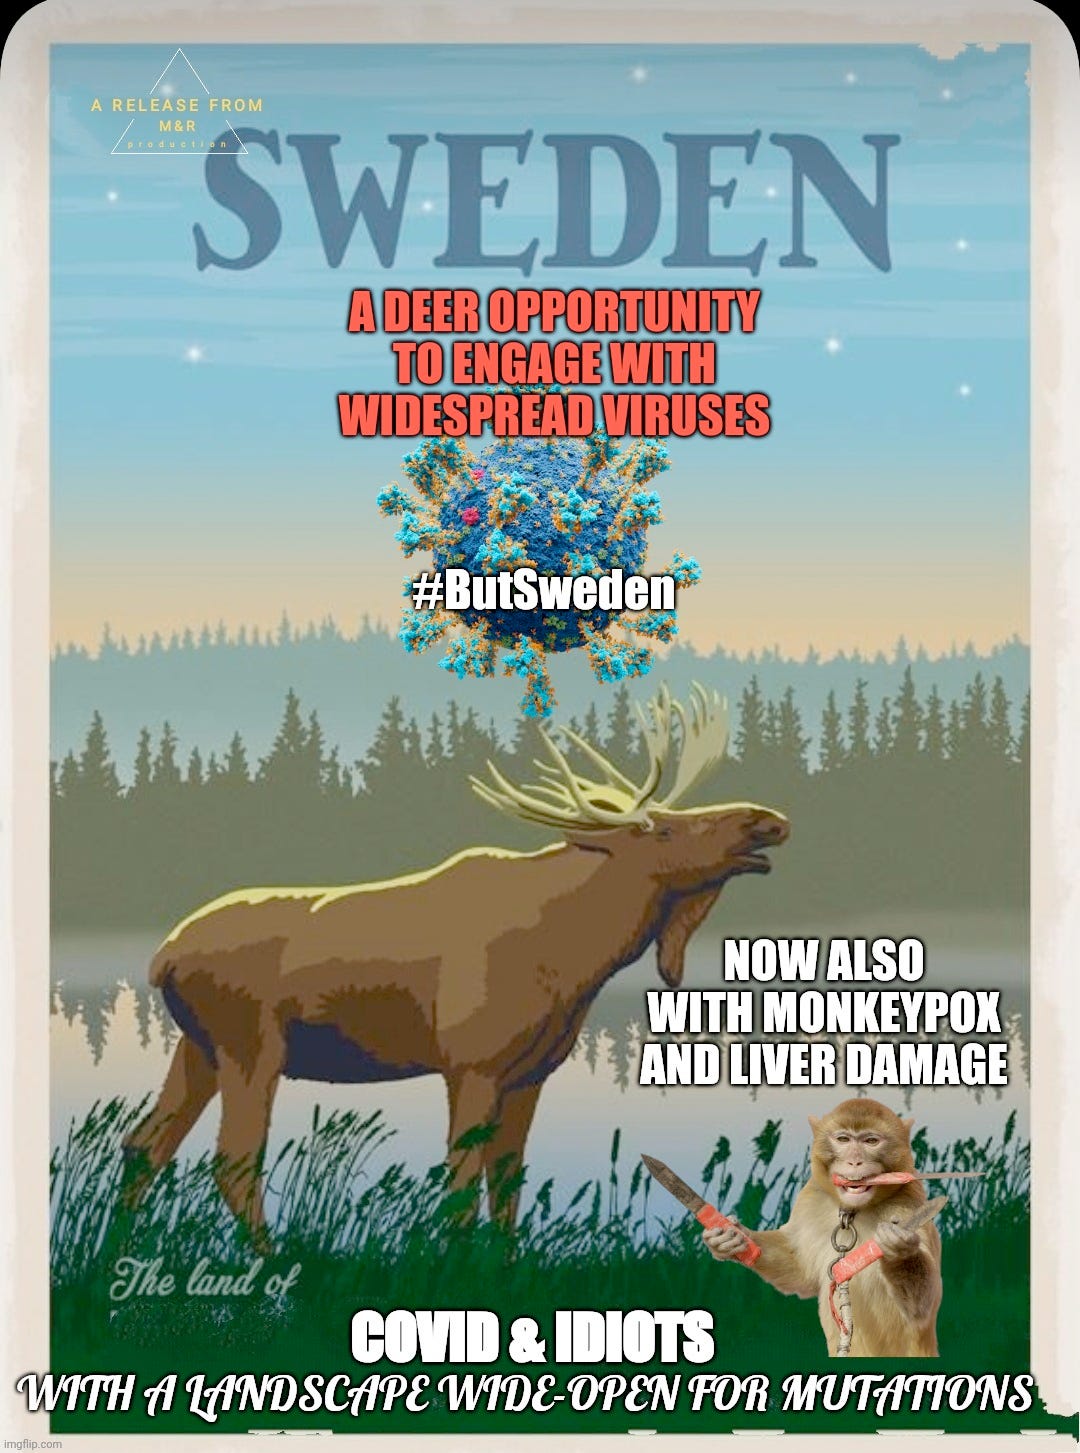 An art poster labeled Sweden with a painting of a moose with a lake and forest behind with the captions A deer opportunity to engage with widespread viruses hashtag but sweden now also with monkeypox and liver damage covid & idiots iwth a landscape wide open for mutations, and a photo of a monkey has been photoshopped into the image the monkey is holding 3 knives one in each hand and one in his mouth